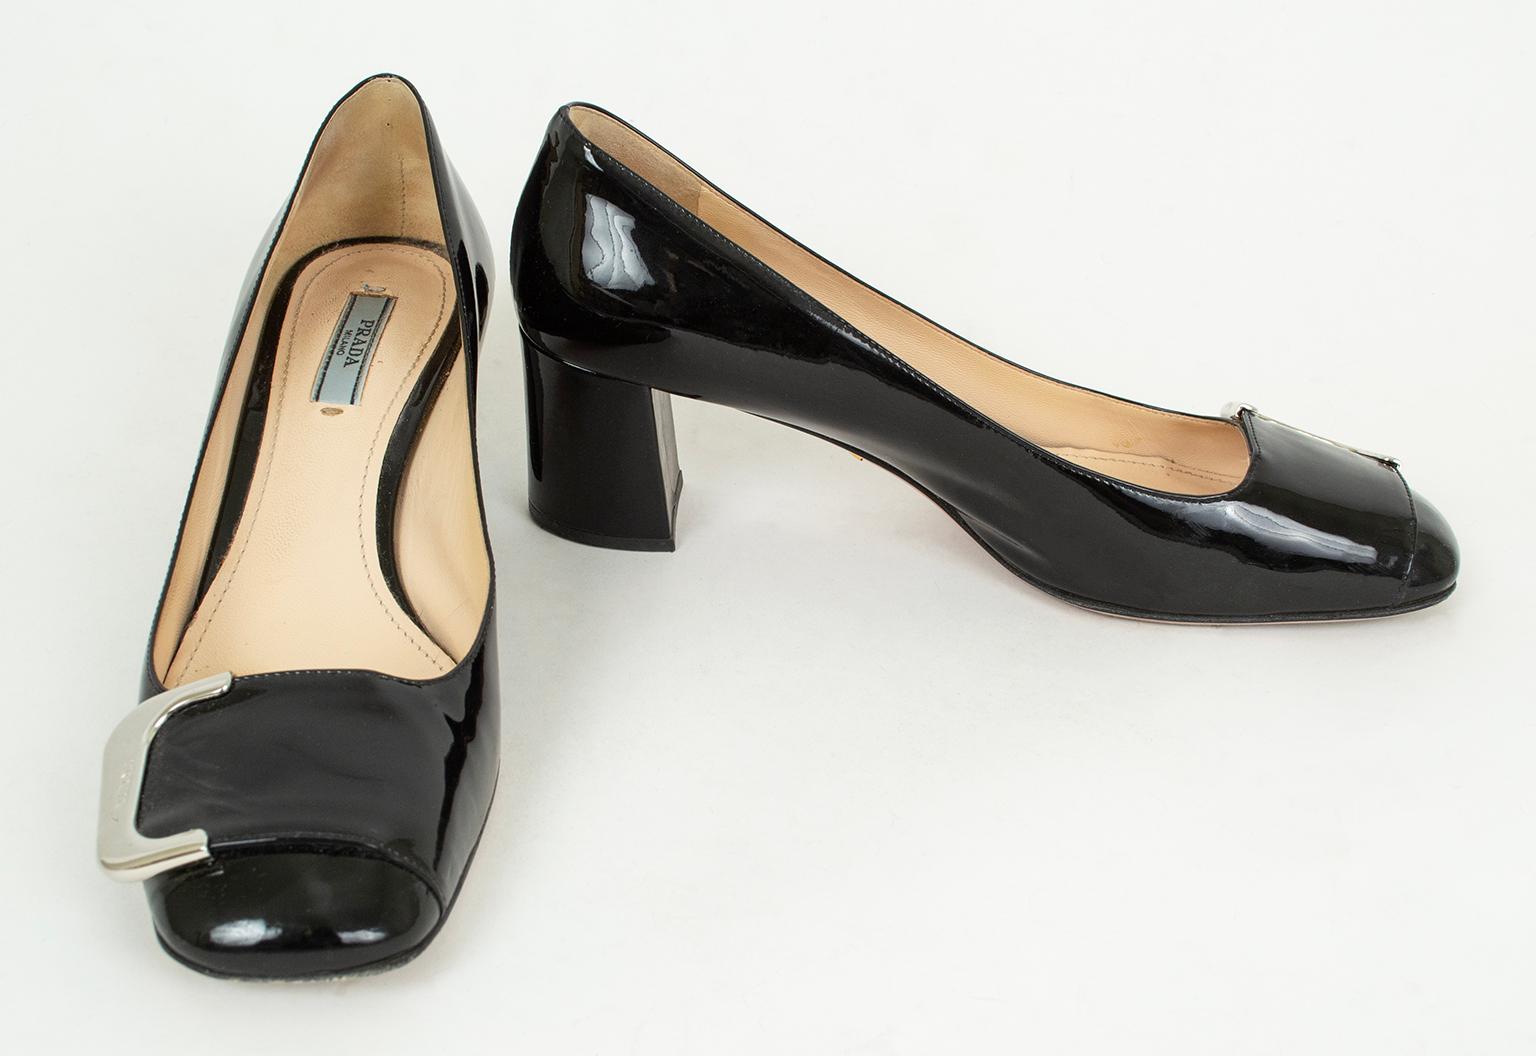 Hard to find a pump dainty enough to wear with a dress but substantial enough to pass as a loafer. These block heels fit the bill and feature a signed silver buckle that catches the eye.

Patent leather block heel loafer pump with signed silver